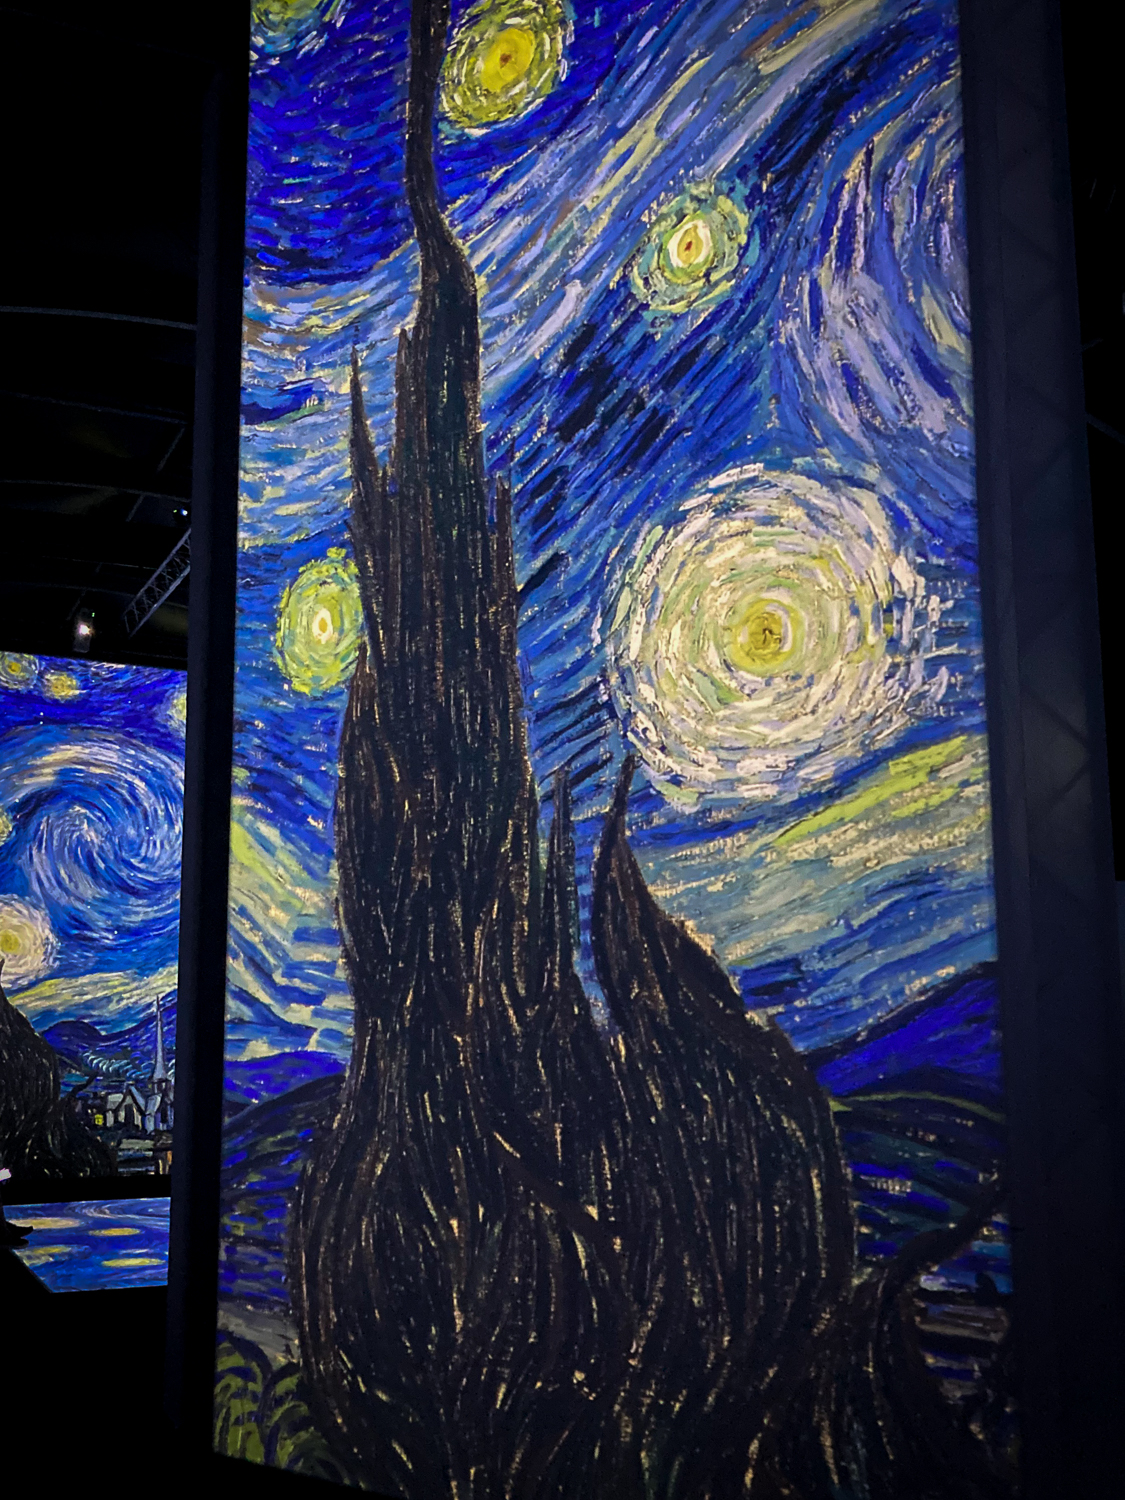 A screen showing a portion of Van Gogh's Starry Night